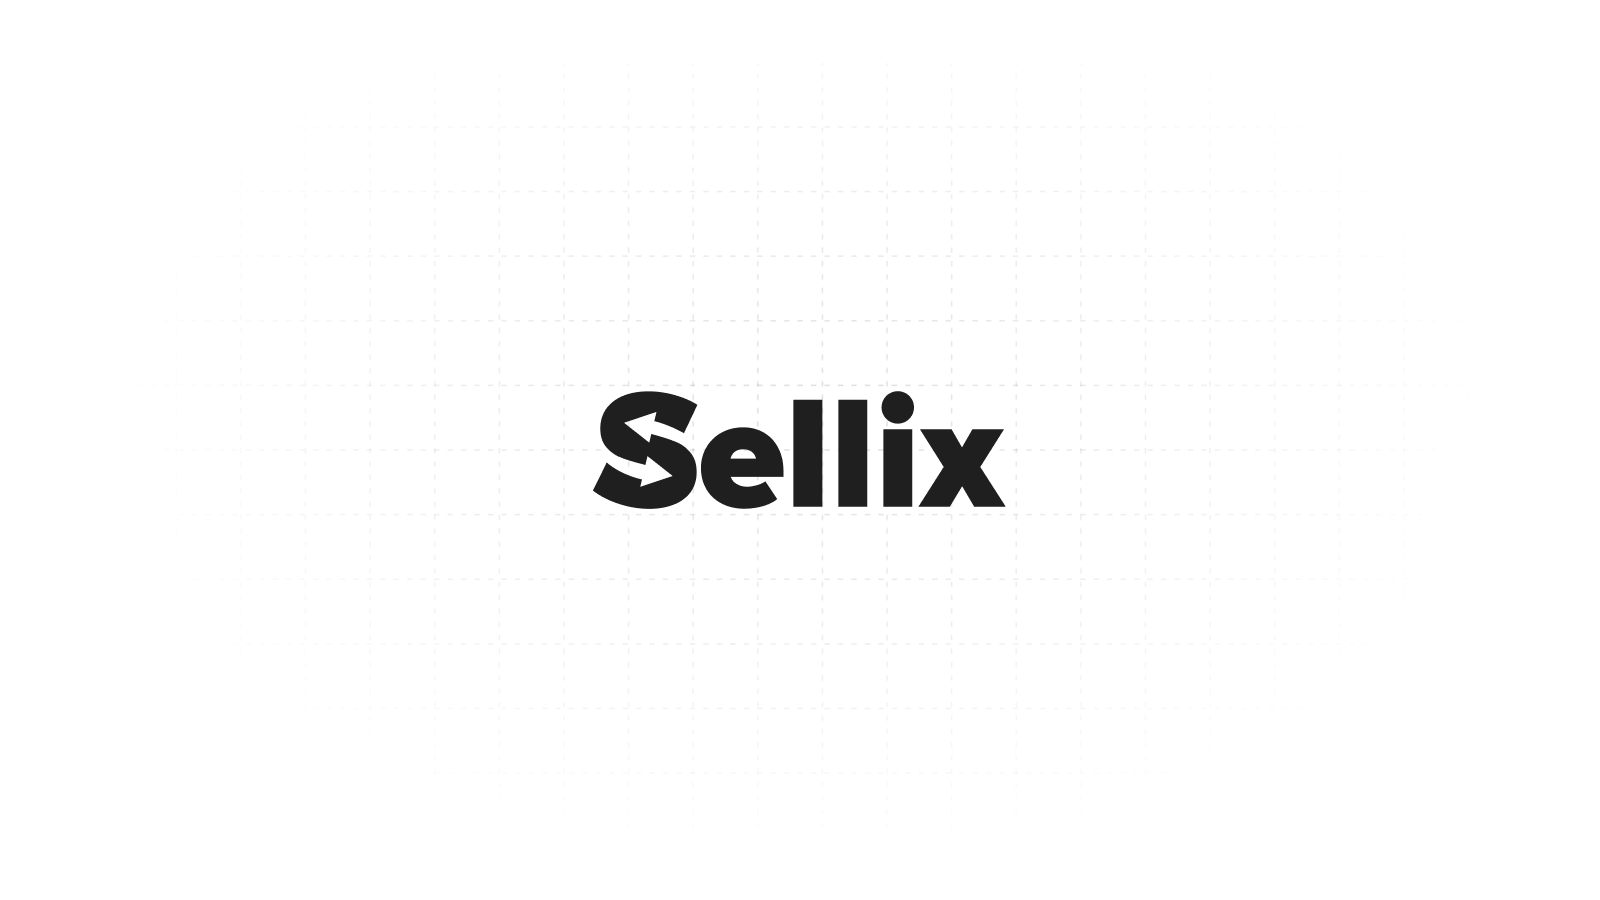 How Sellix is Building the Future of Digital Ecommerce